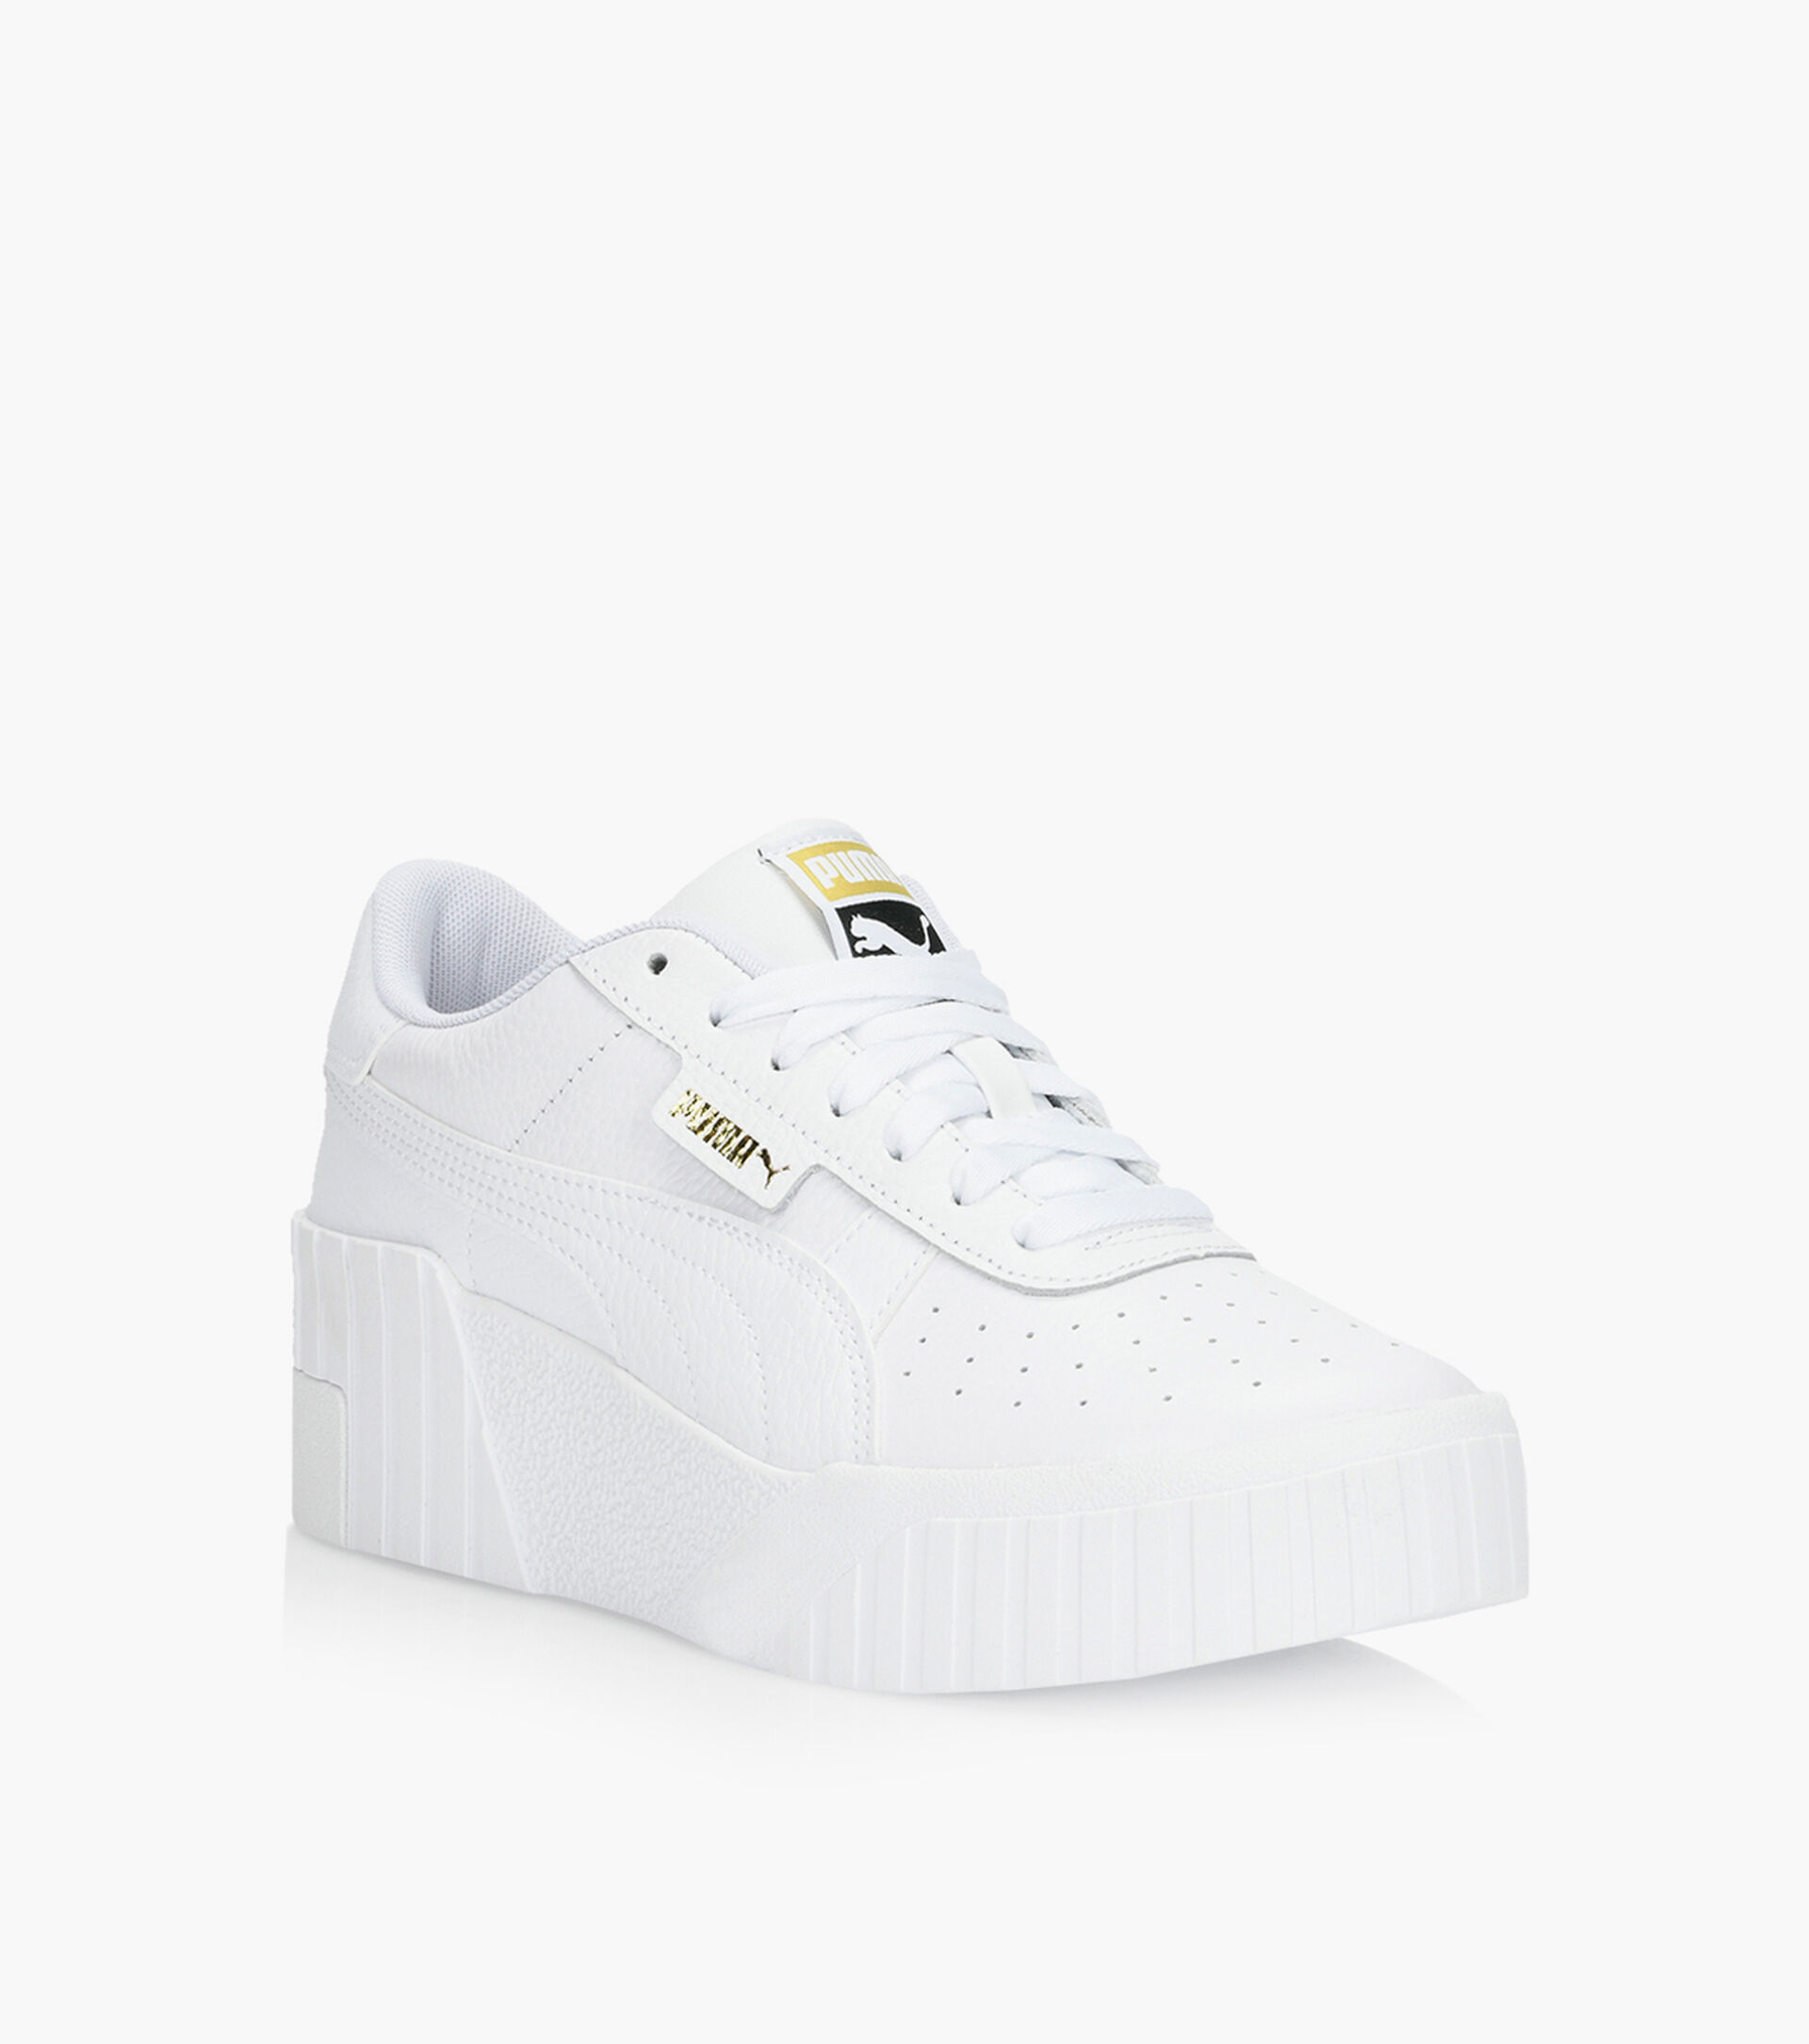 PUMA CALI WEDGE - White Leather | Browns Shoes